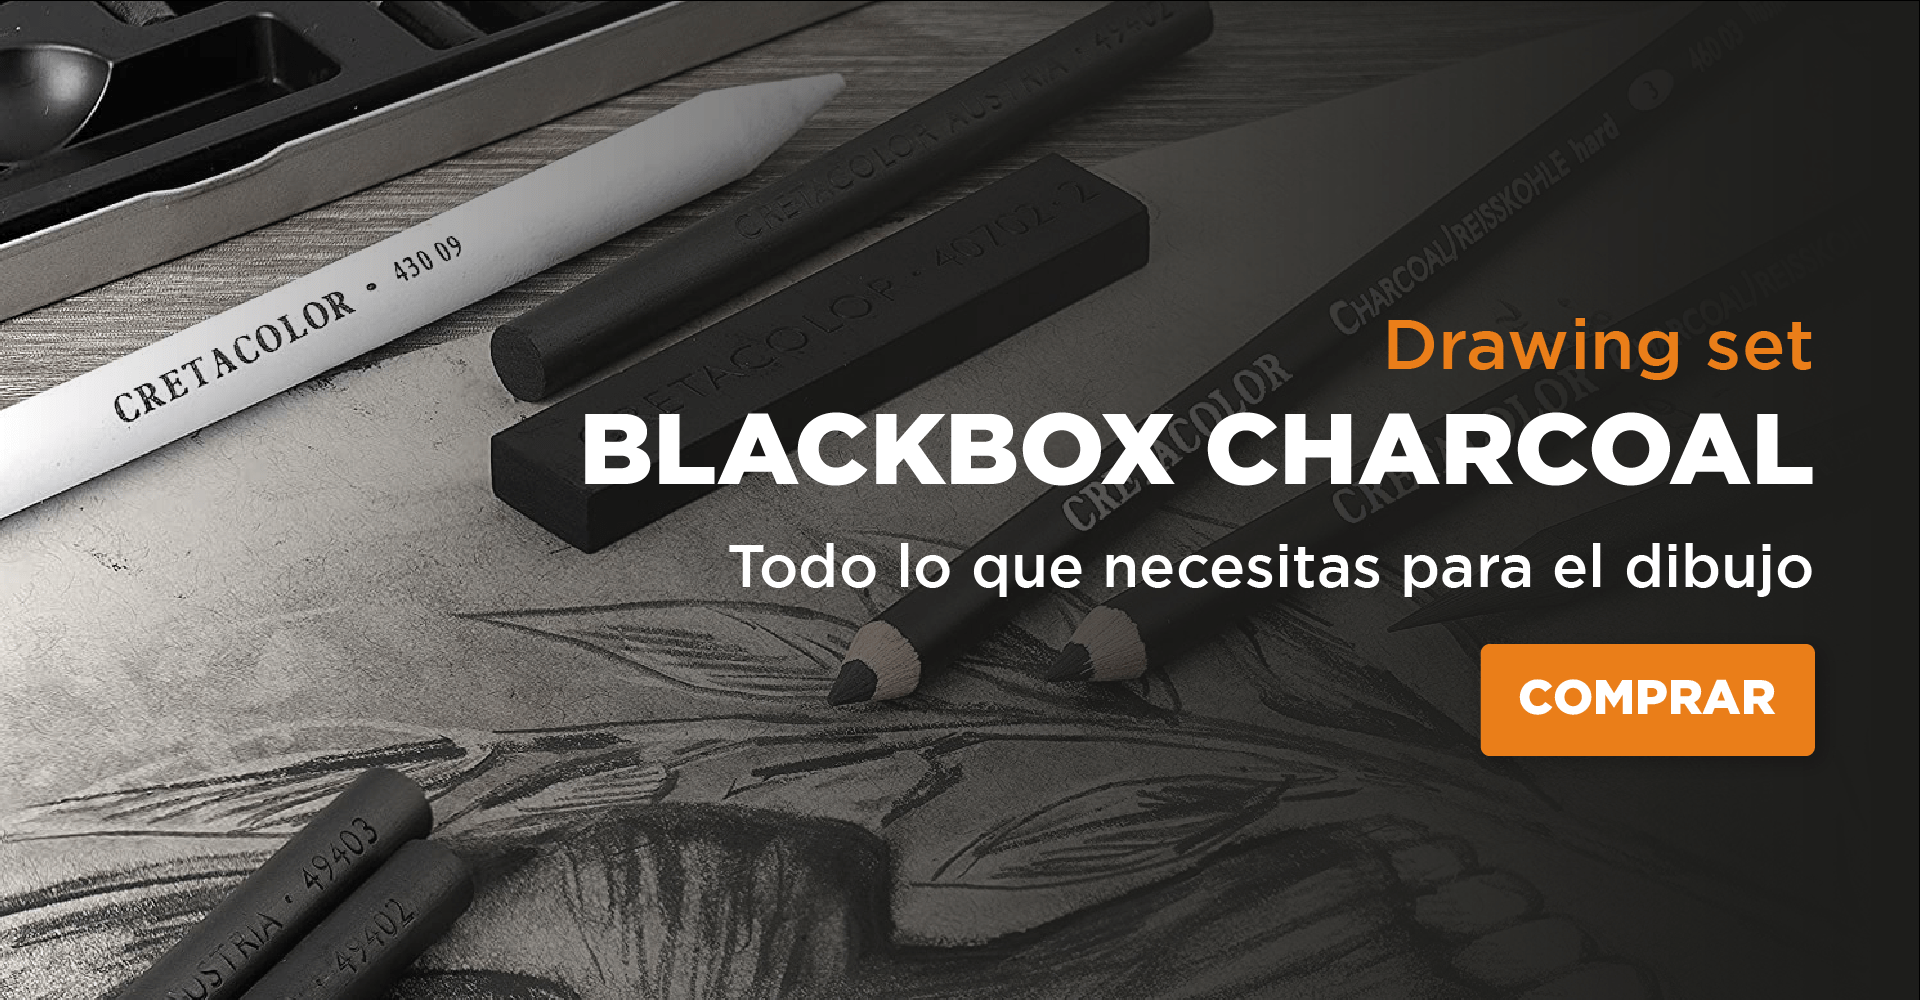 Blacbox Charcoal